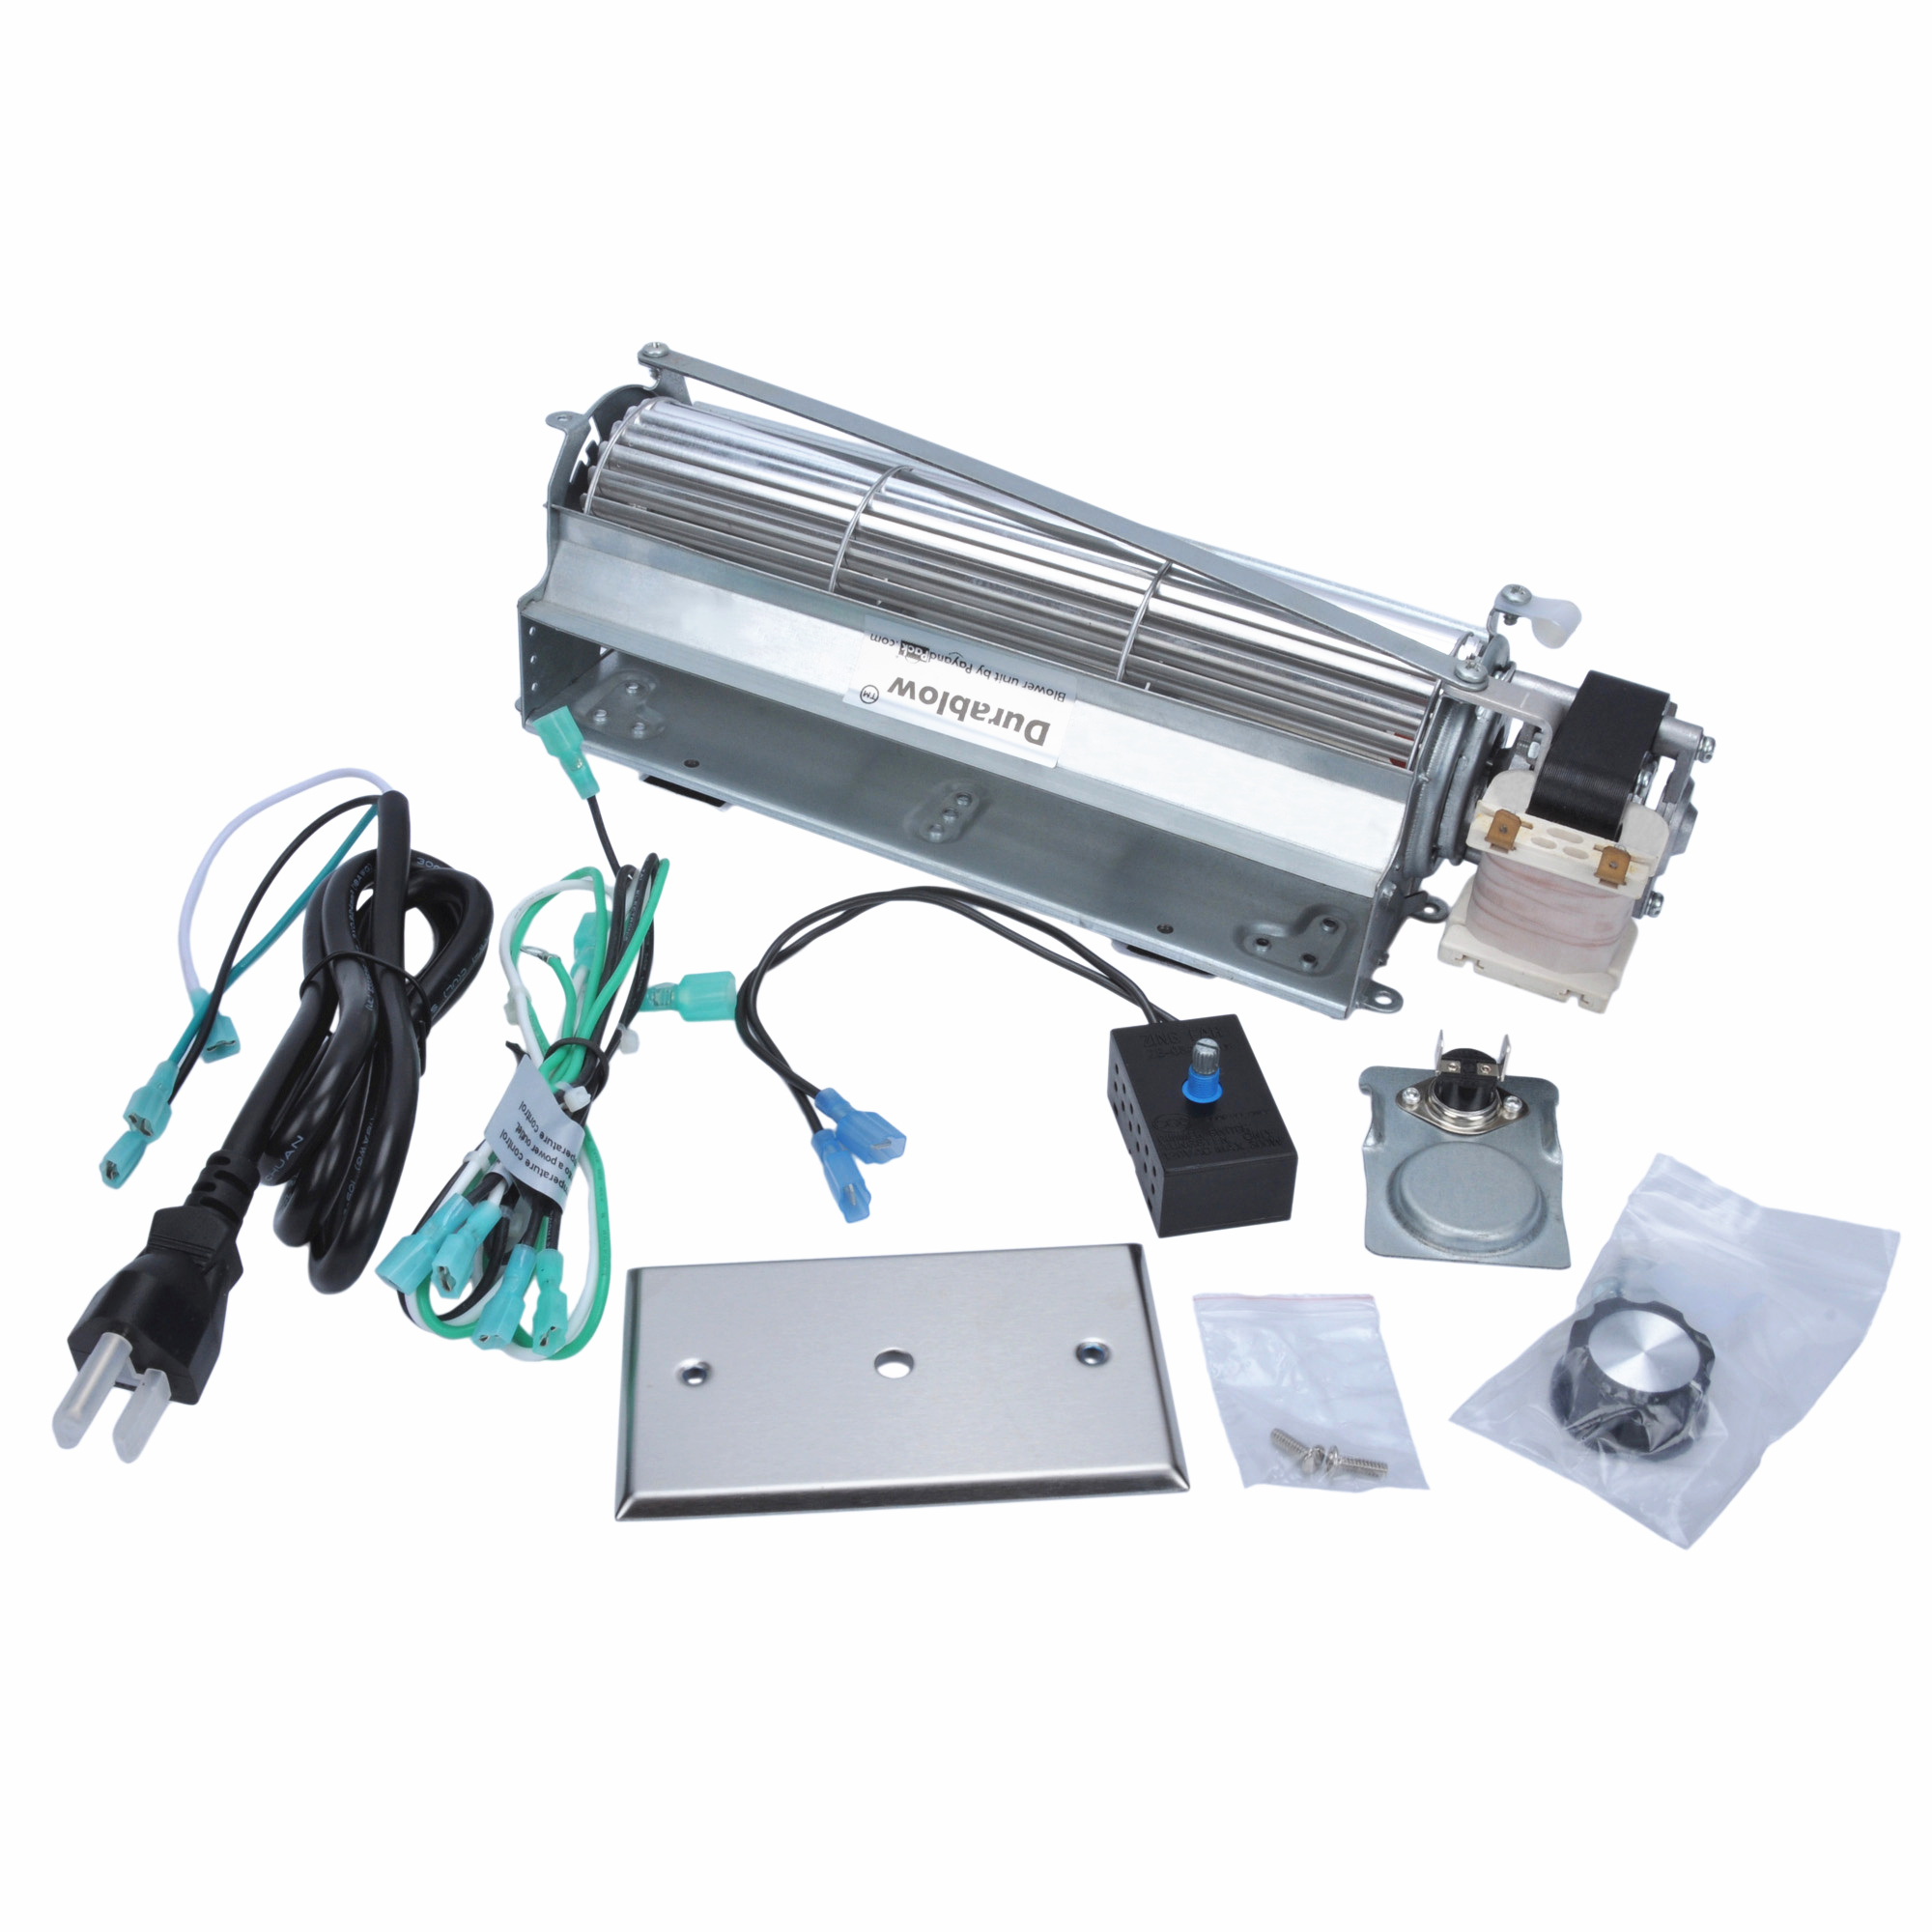 Details About Durablow Fireplace Blower Fan Kit For Heatilator Cfm Northern Flame Rotom intended for sizing 2000 X 2000